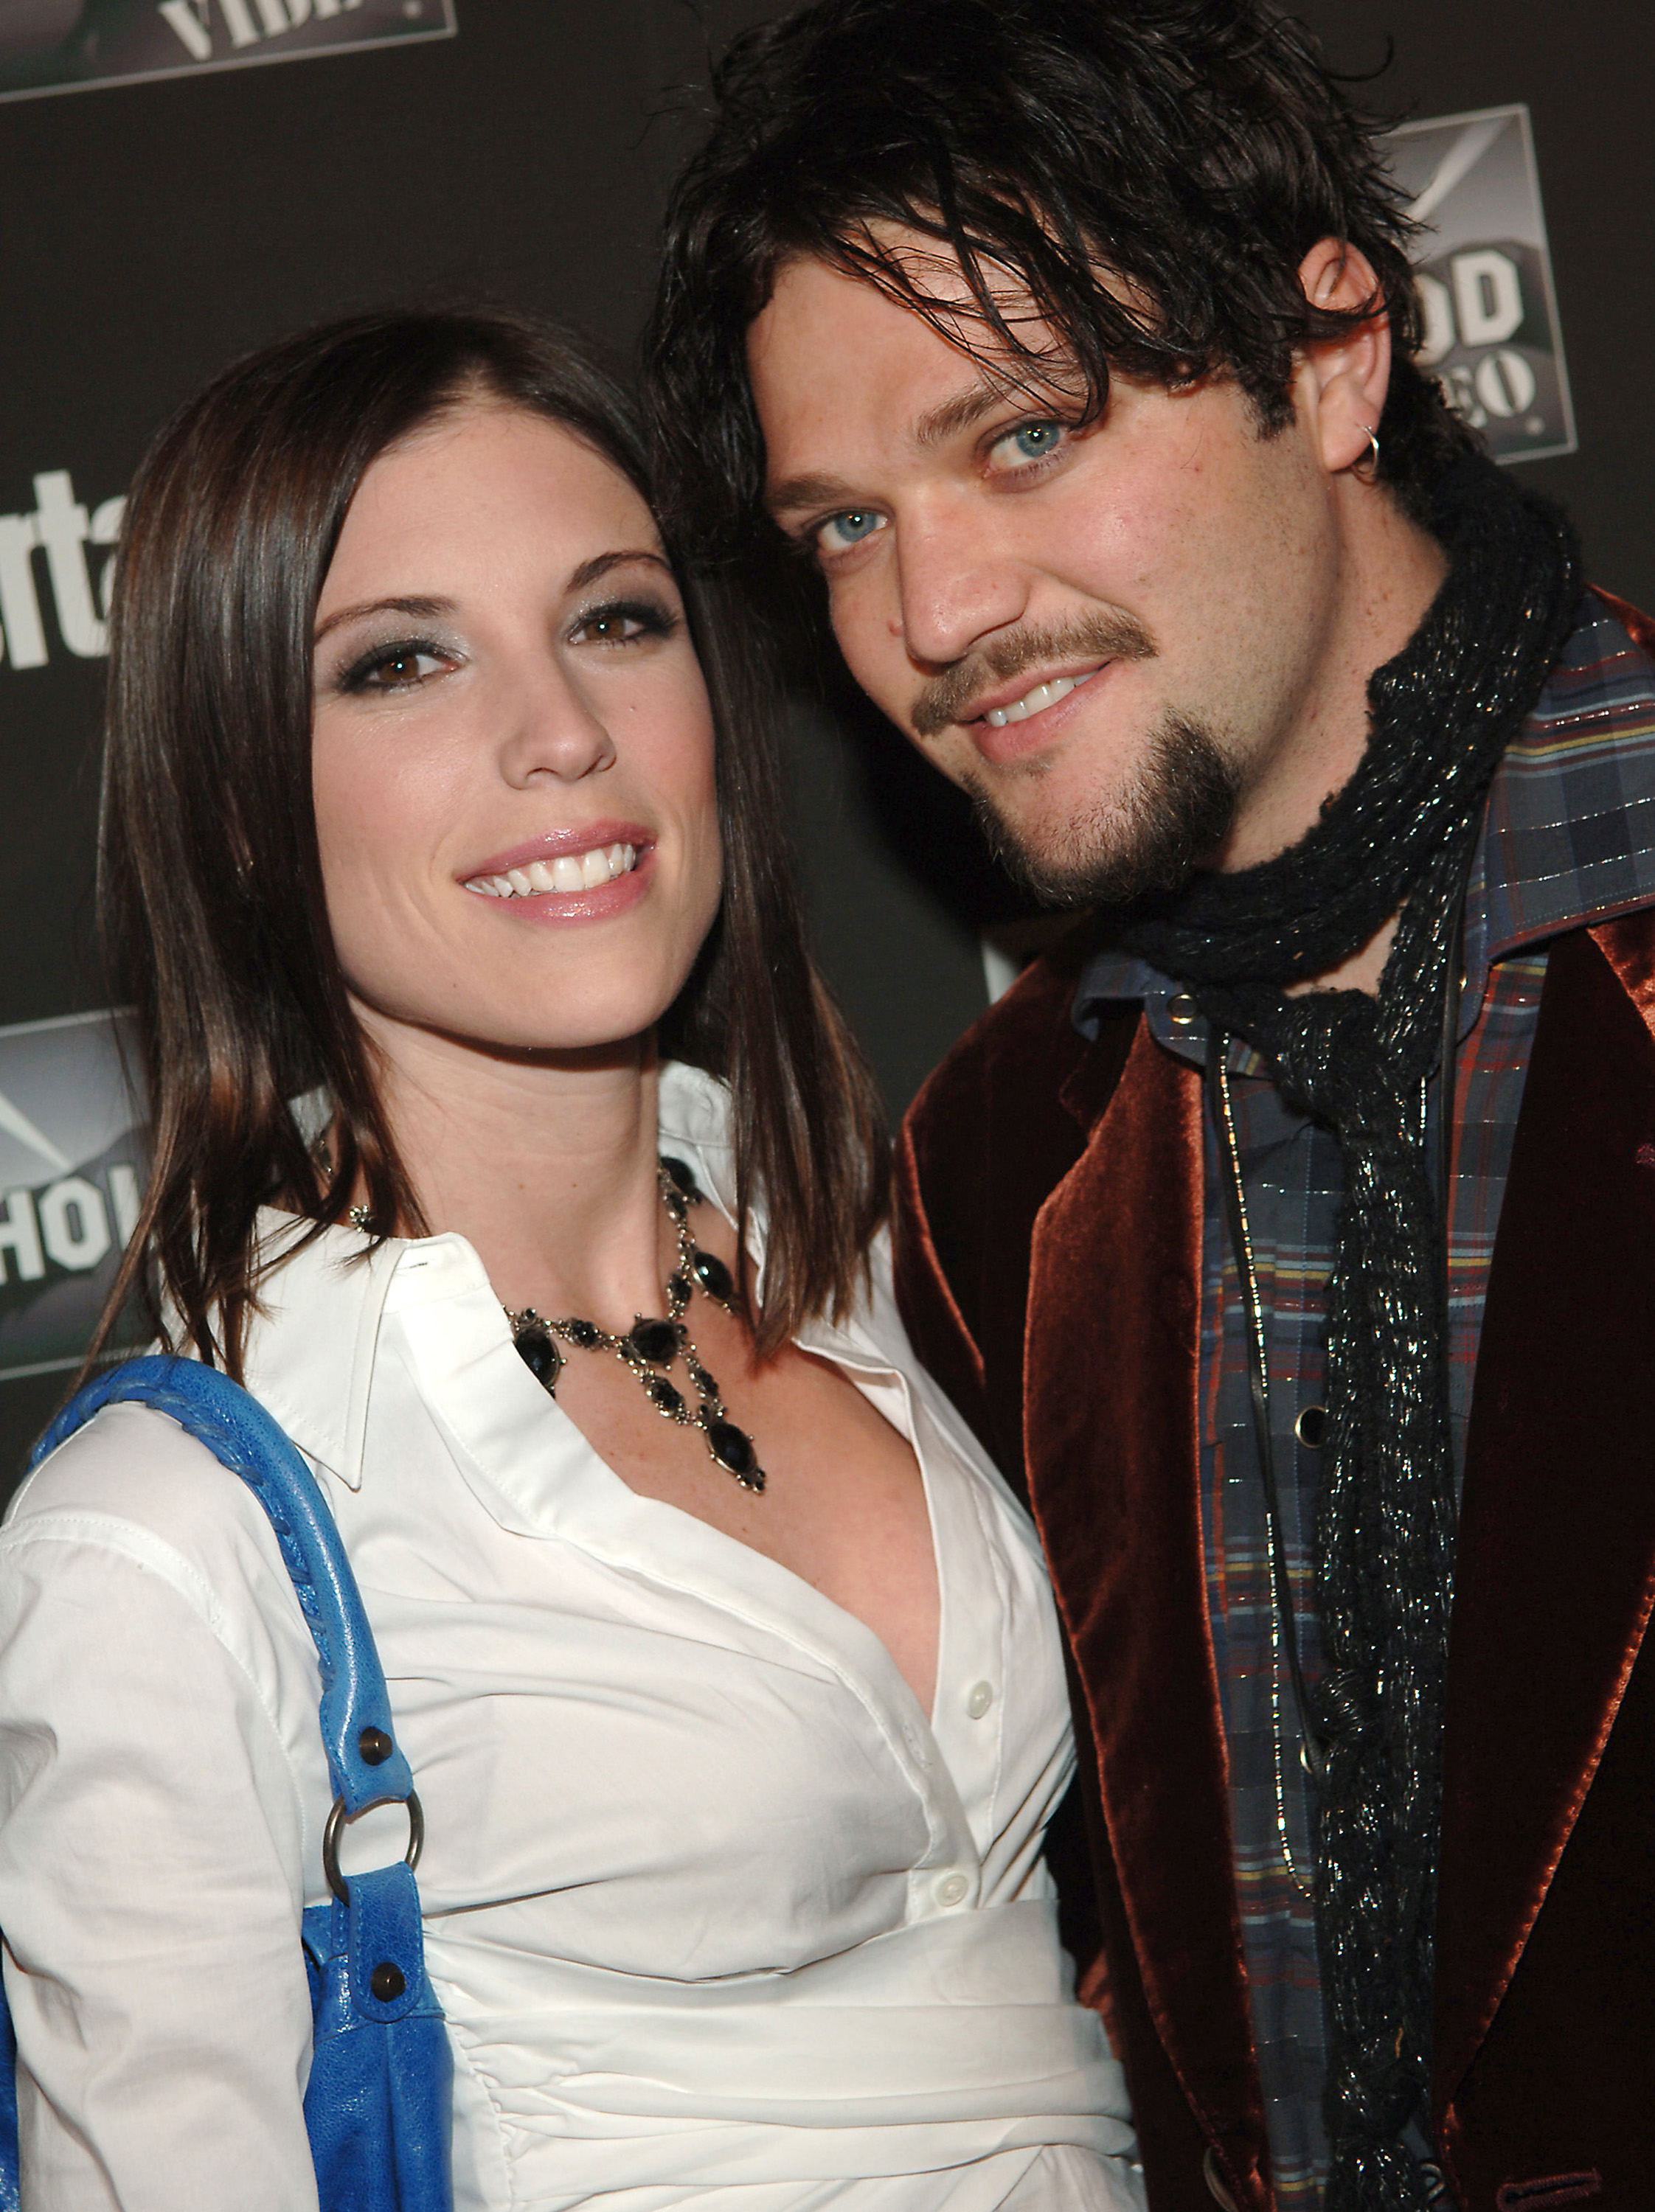 Missy Rothstein and Bam Margera at Entertainment Weekly 13th Annual Academy Awards Viewing Party at Elaine's on February 25, 2007 | Source: Getty Images